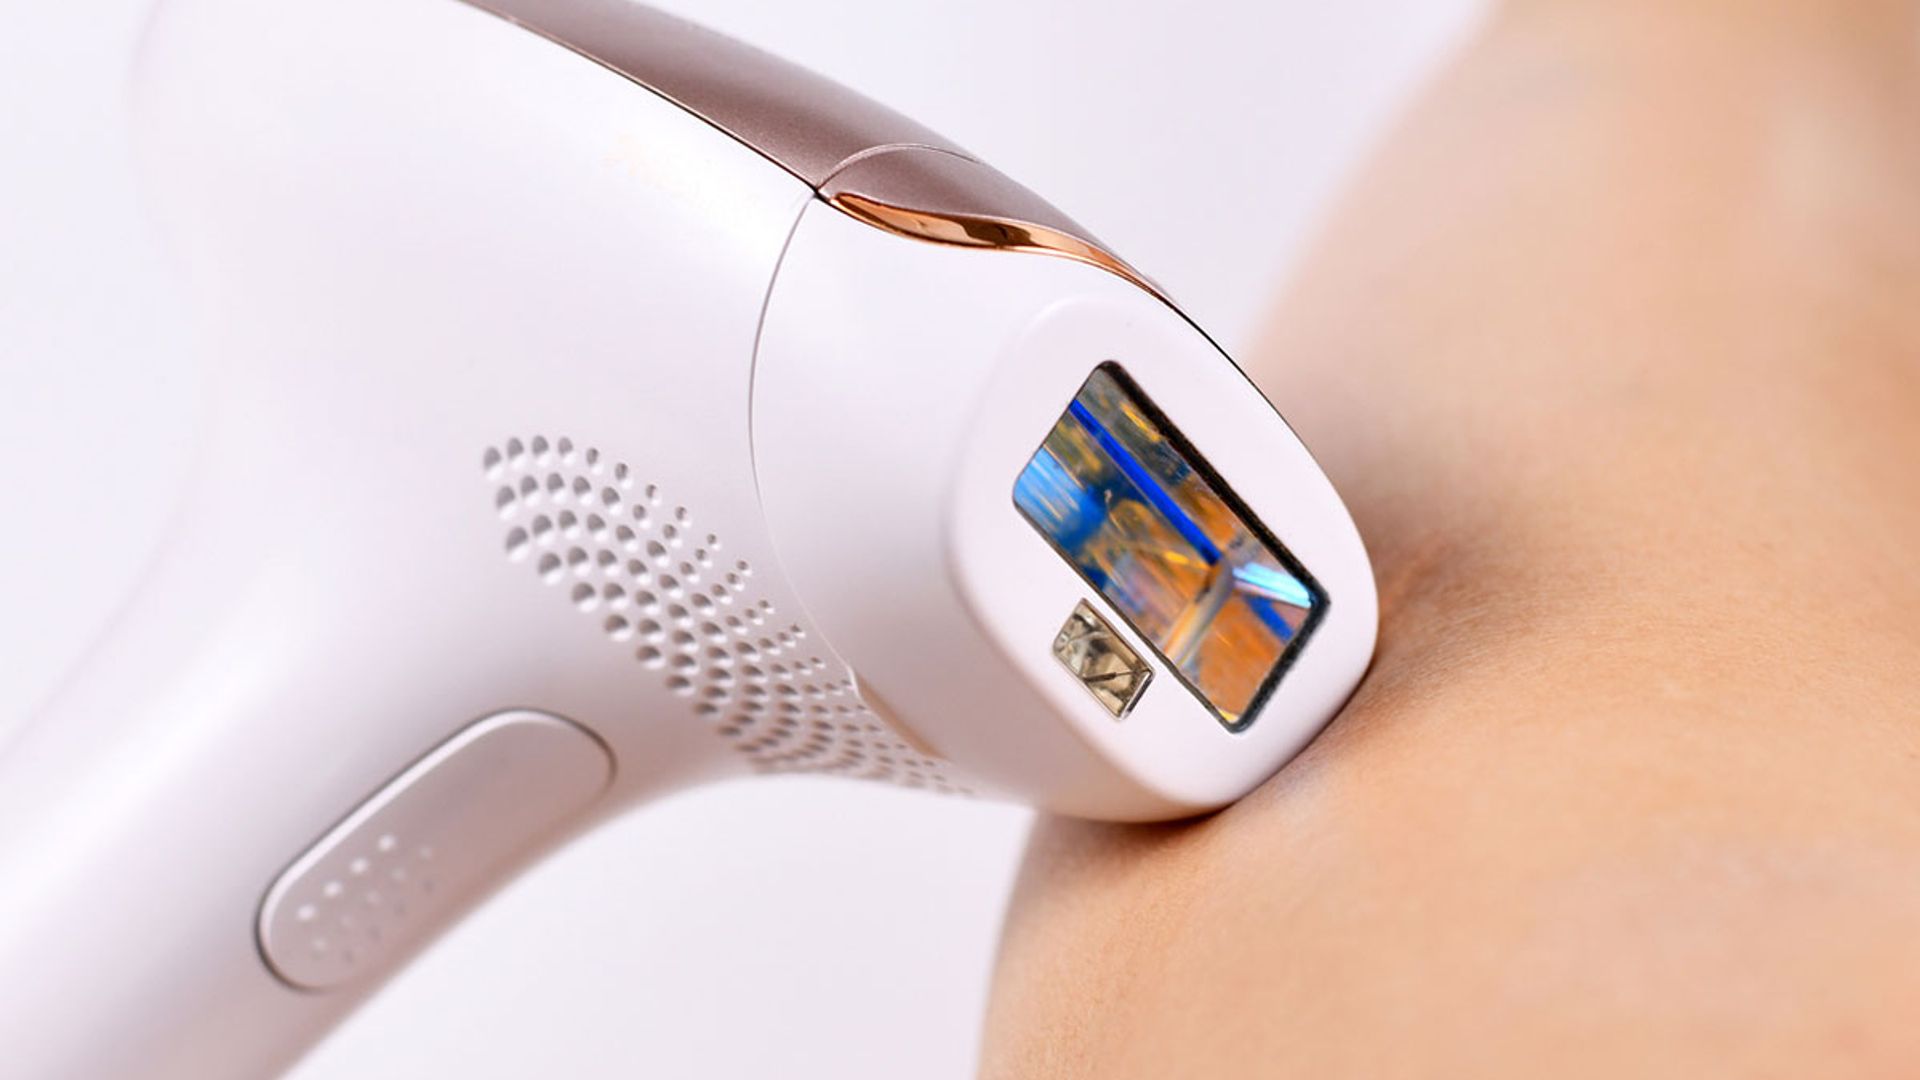 10 best at-home laser hair removal kits 2023: Top IPL machines to